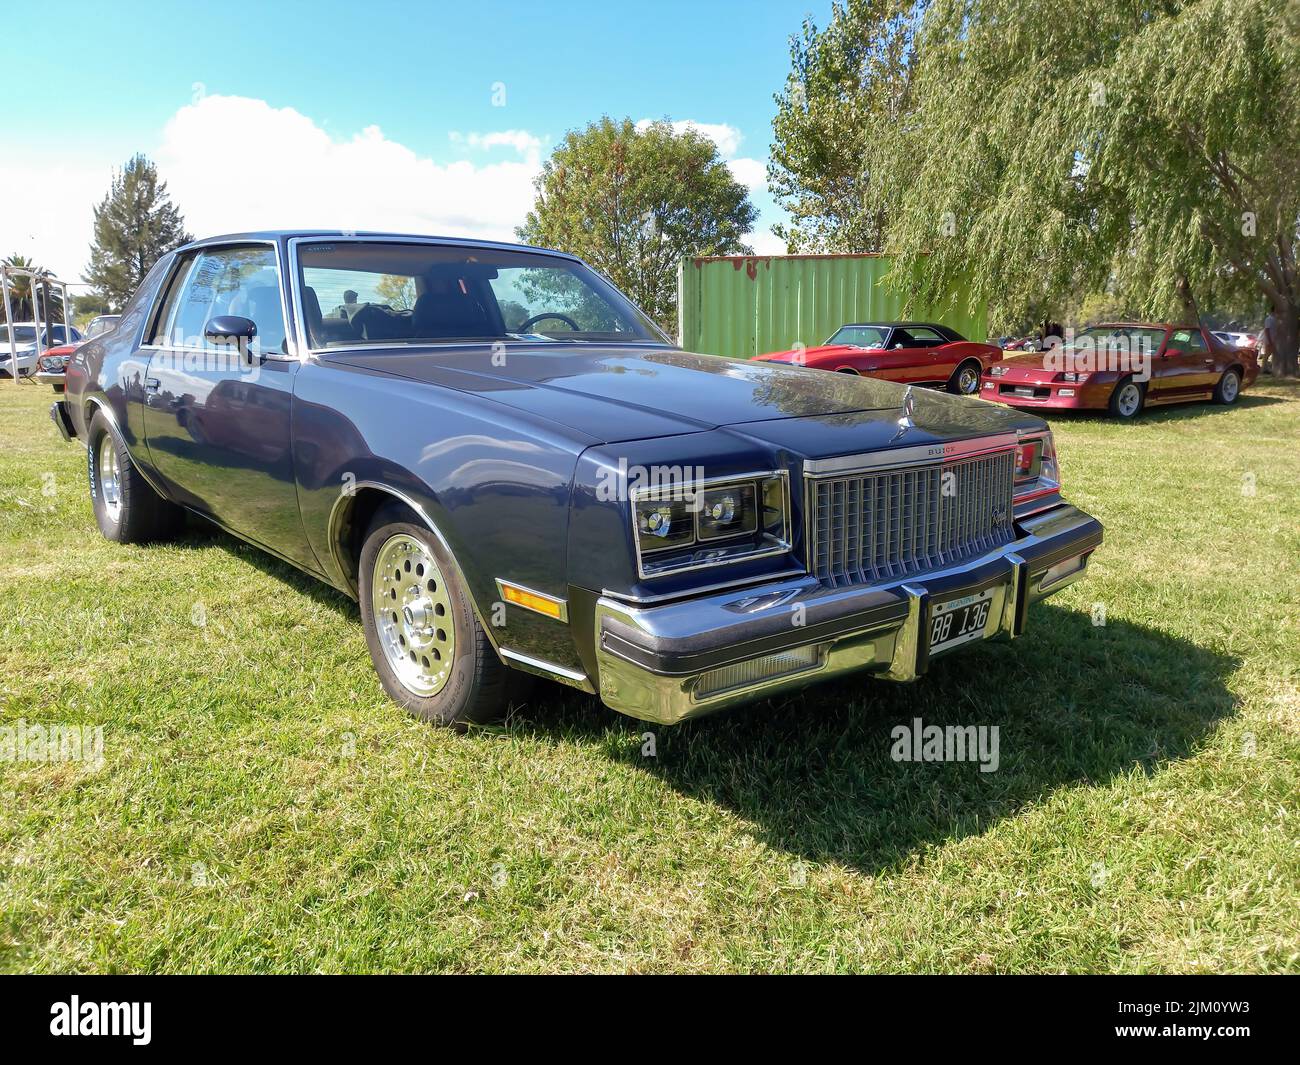 Chascomus, Argentina - Apr 9, 2022: Old blue Buick Regal coupe First Generation 1973 - 1977 by GM parked on the grass. Classic luxury car. Copyspace Stock Photo